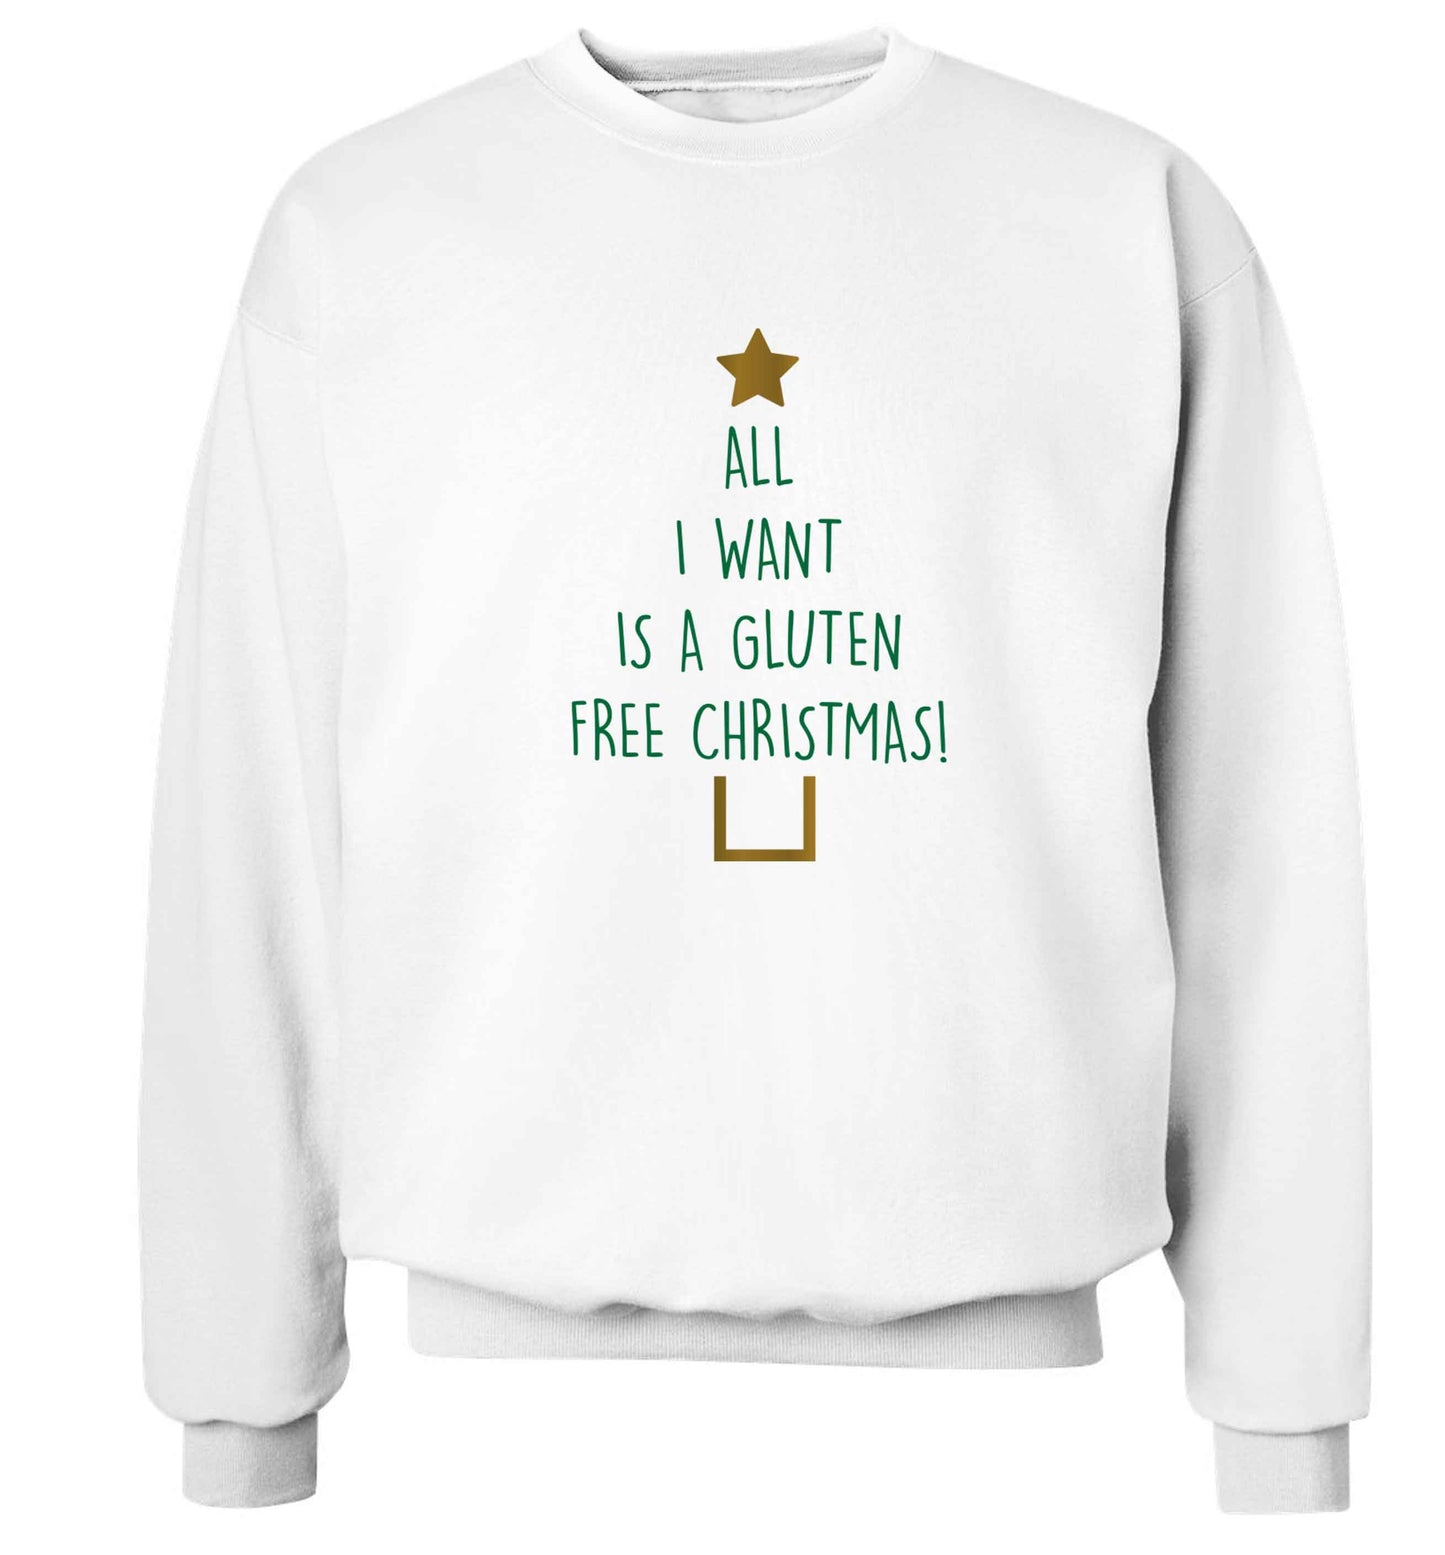 All I want is a gluten free Christmas Adult's unisex white Sweater 2XL